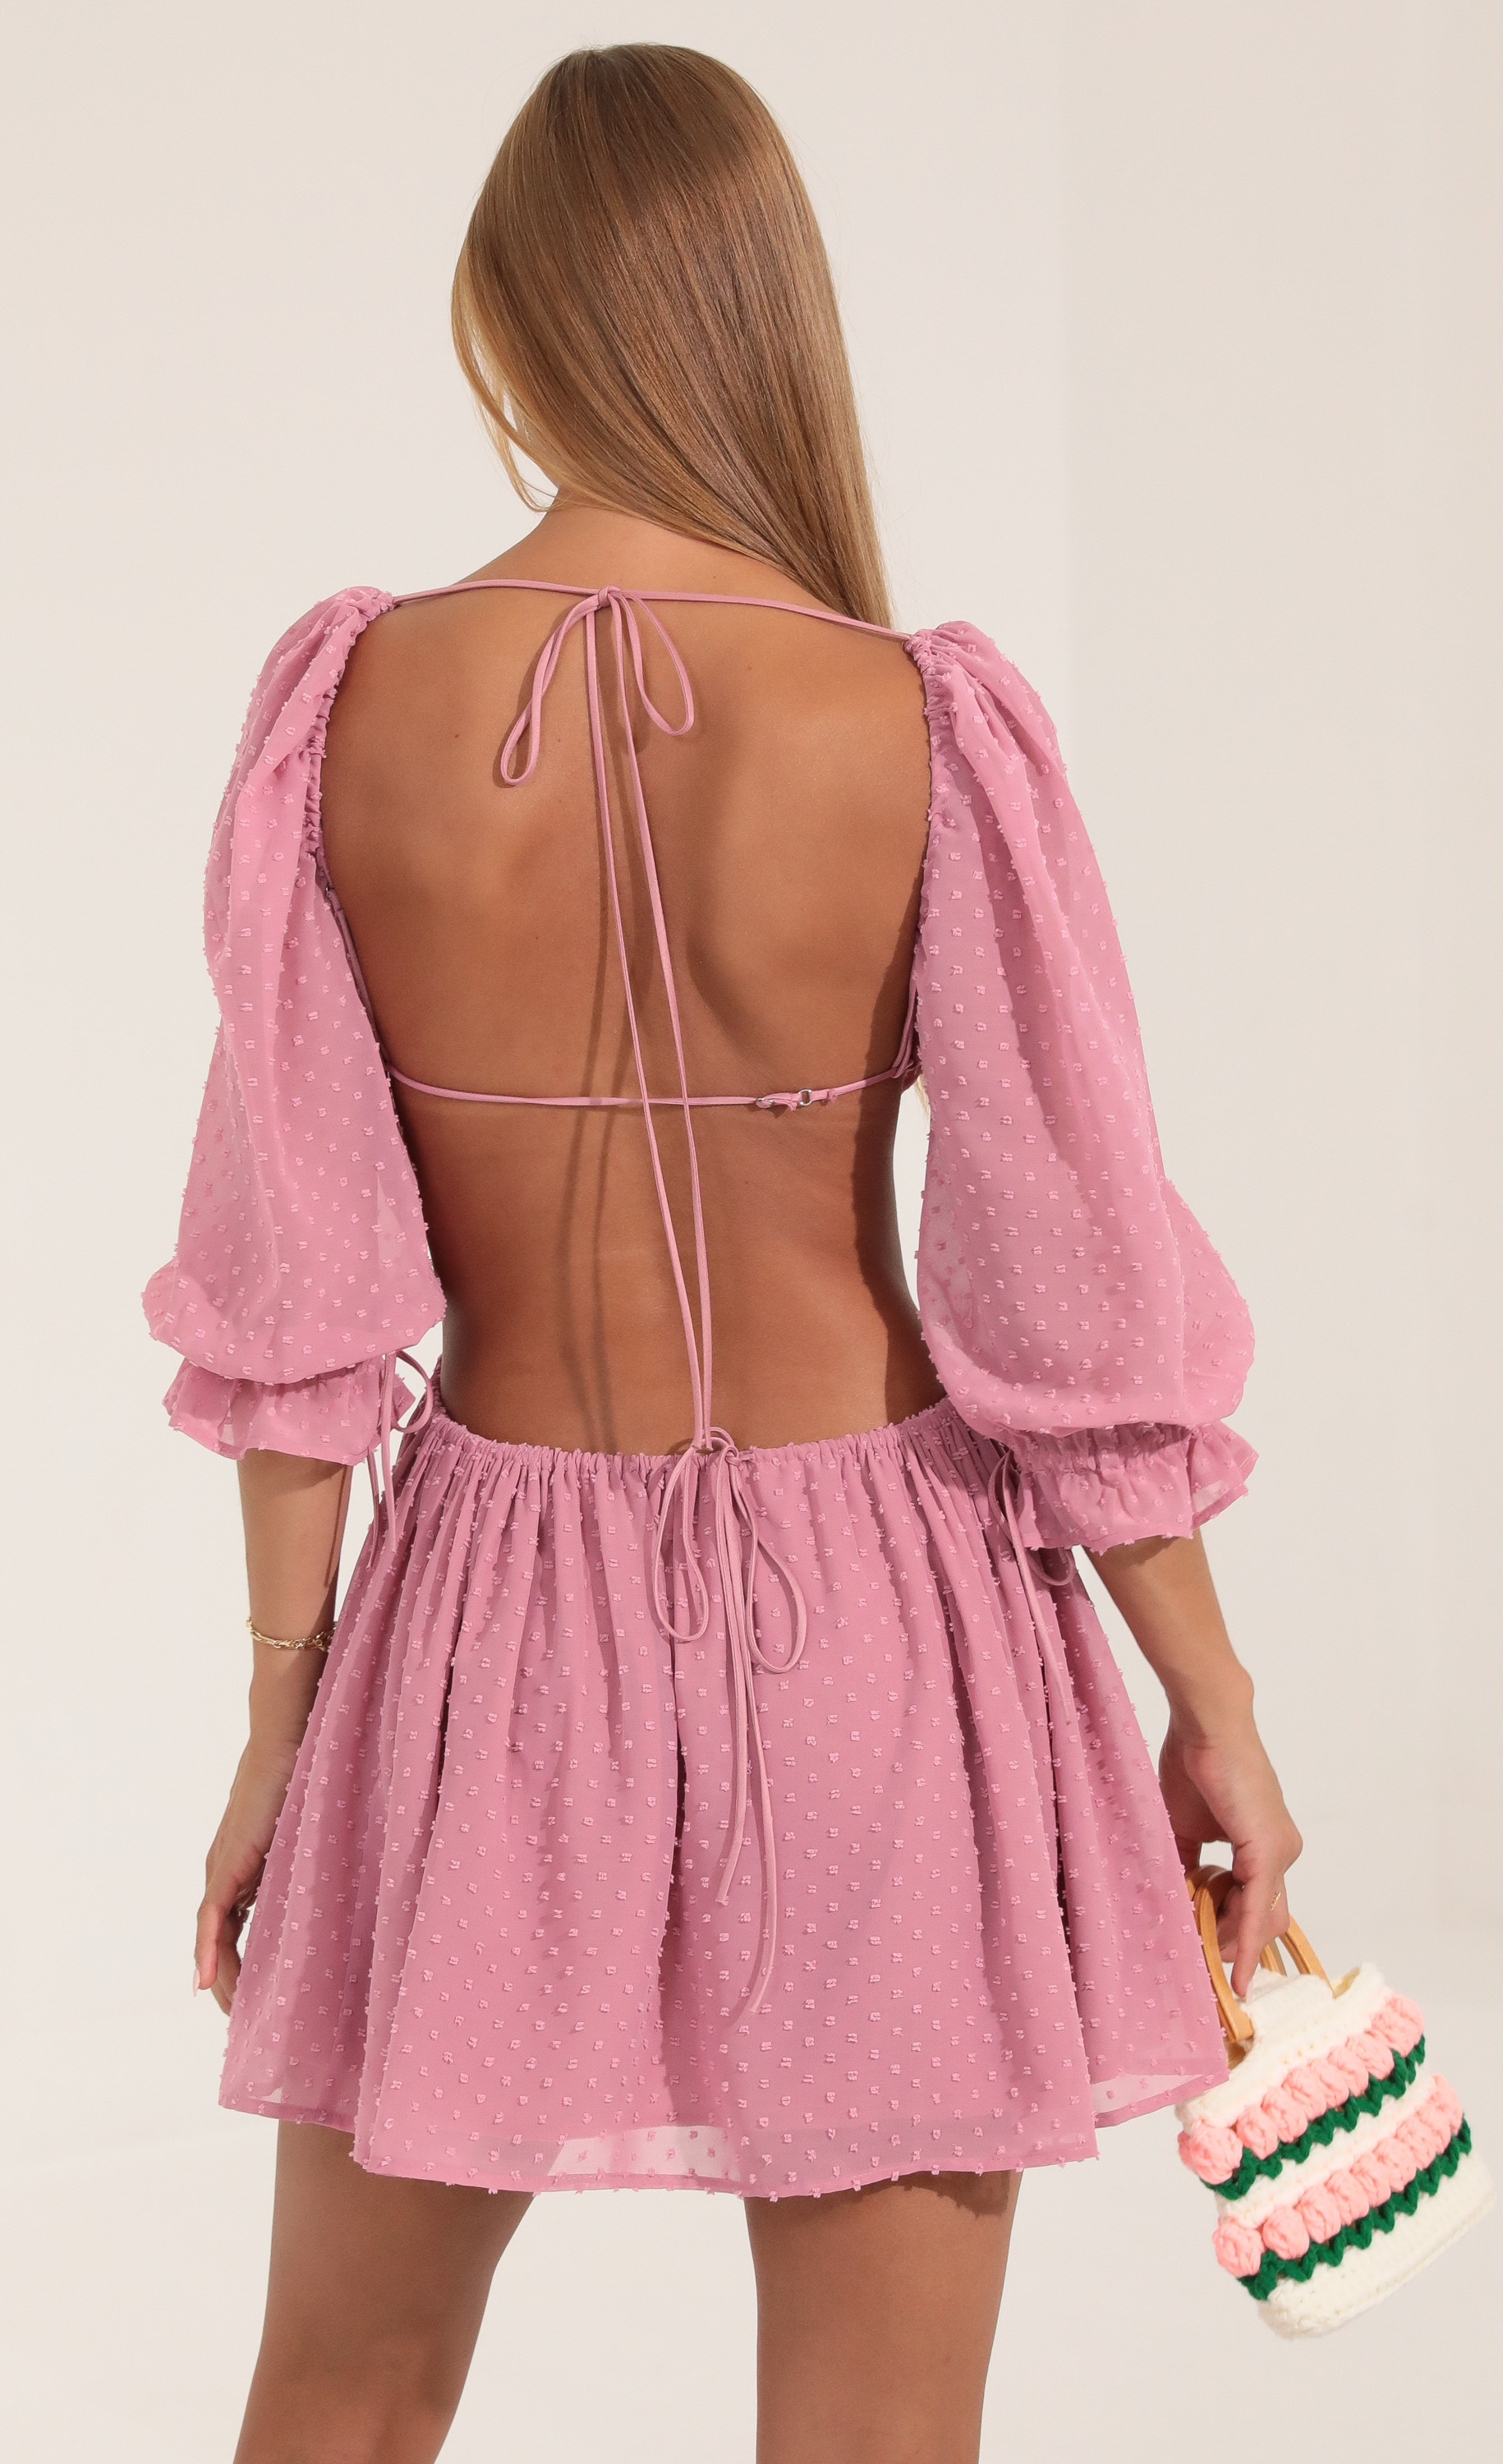 Dotted Chiffon Open Back Dress in Pink